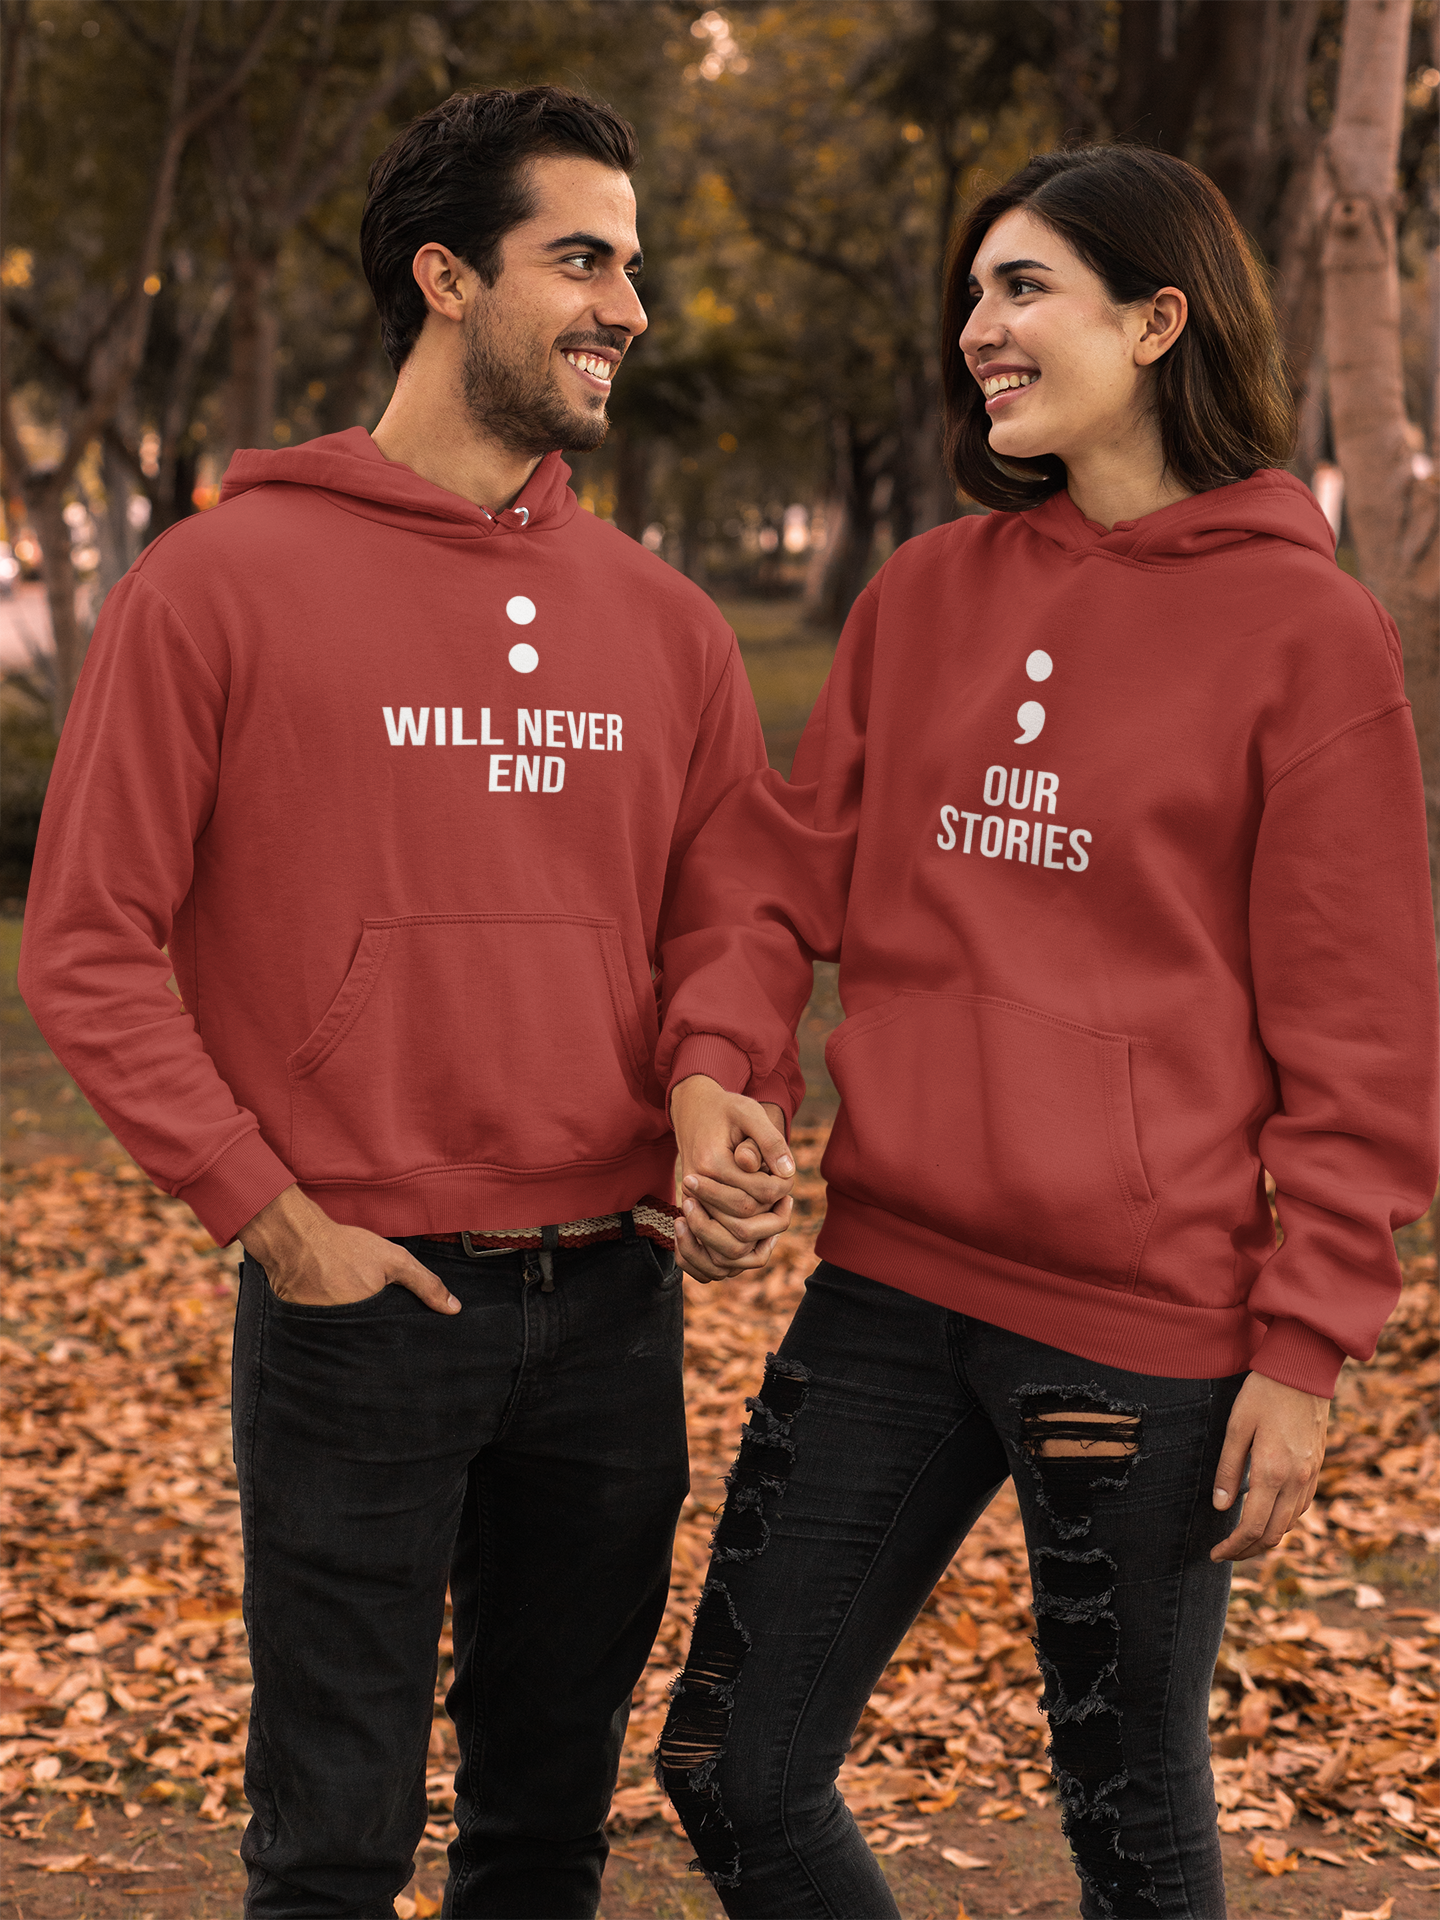 Our Stories Couple Hoodie-FunkyTradition